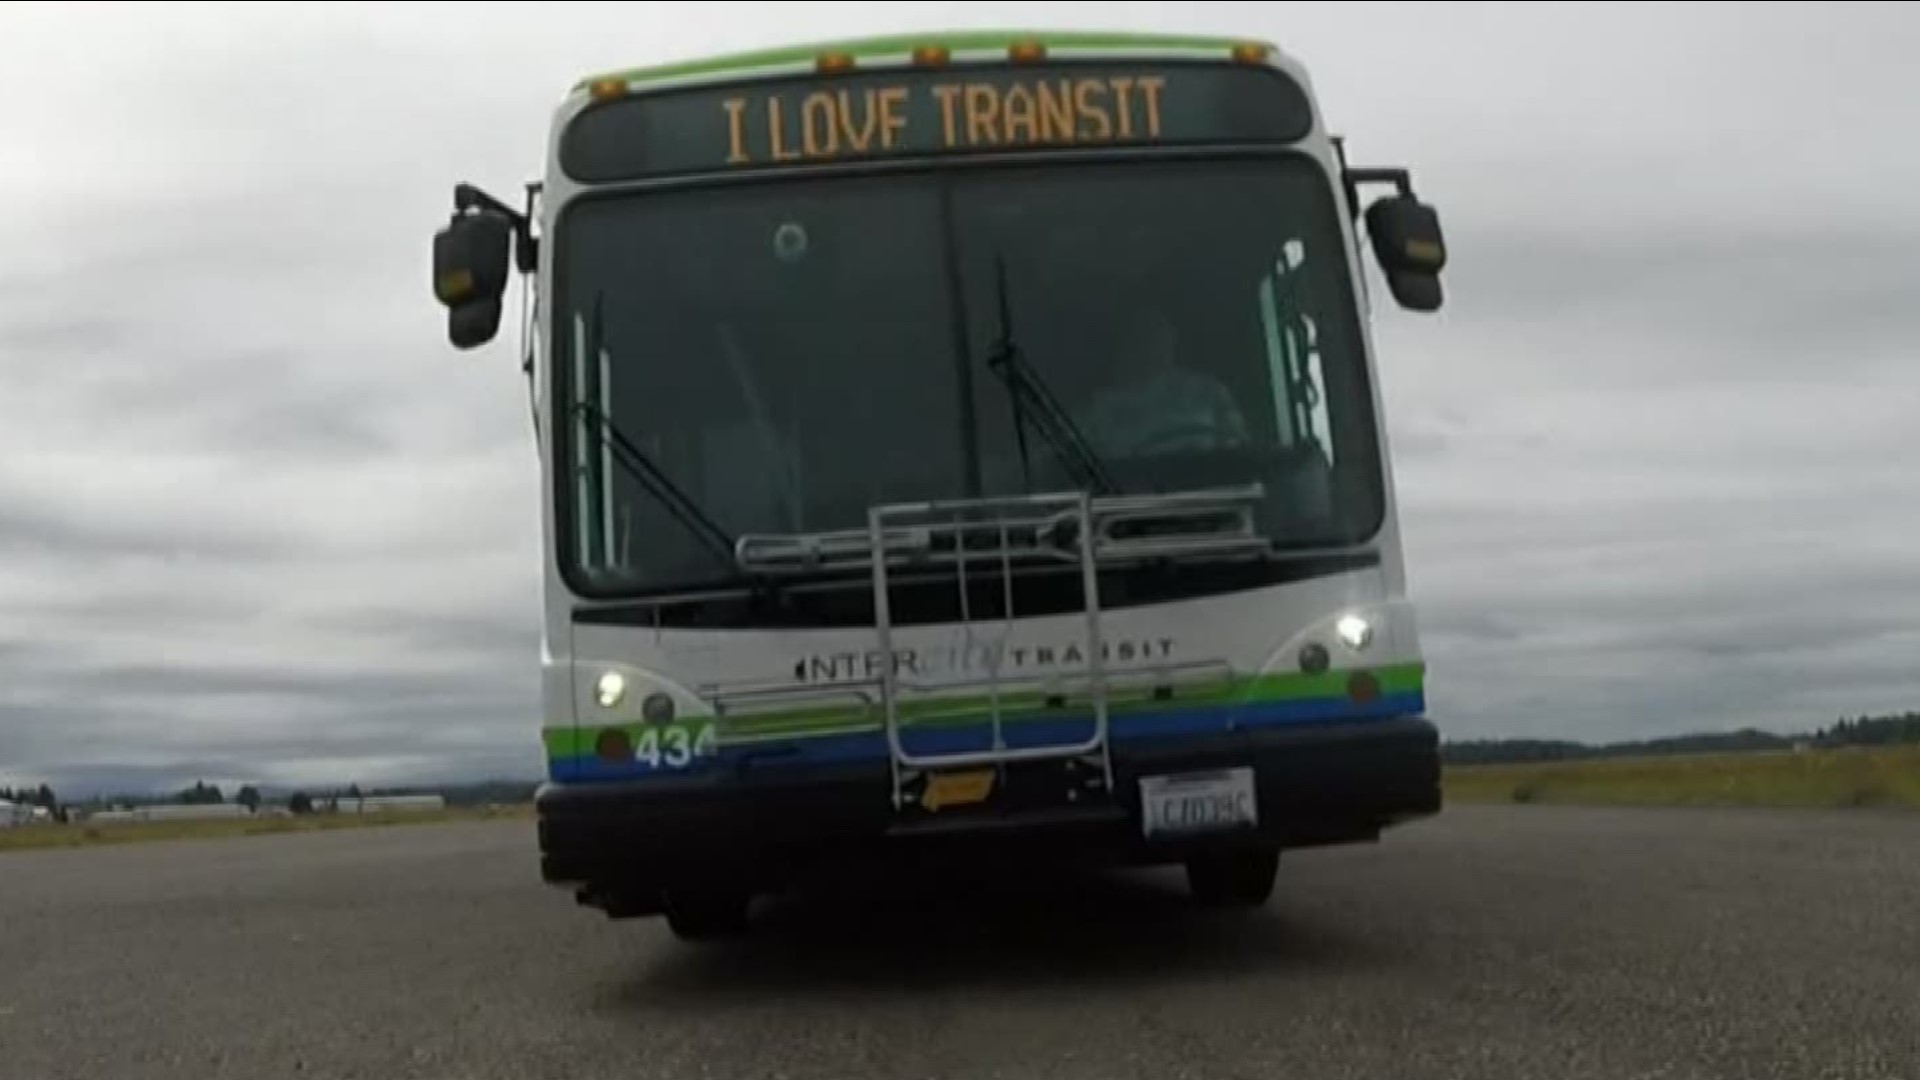 A bus driver from Olympia was just named the best in North America!  Rob Wood drives for InterCity Transit in Thurston County.  We caught up with him practicing for the local championship competition.